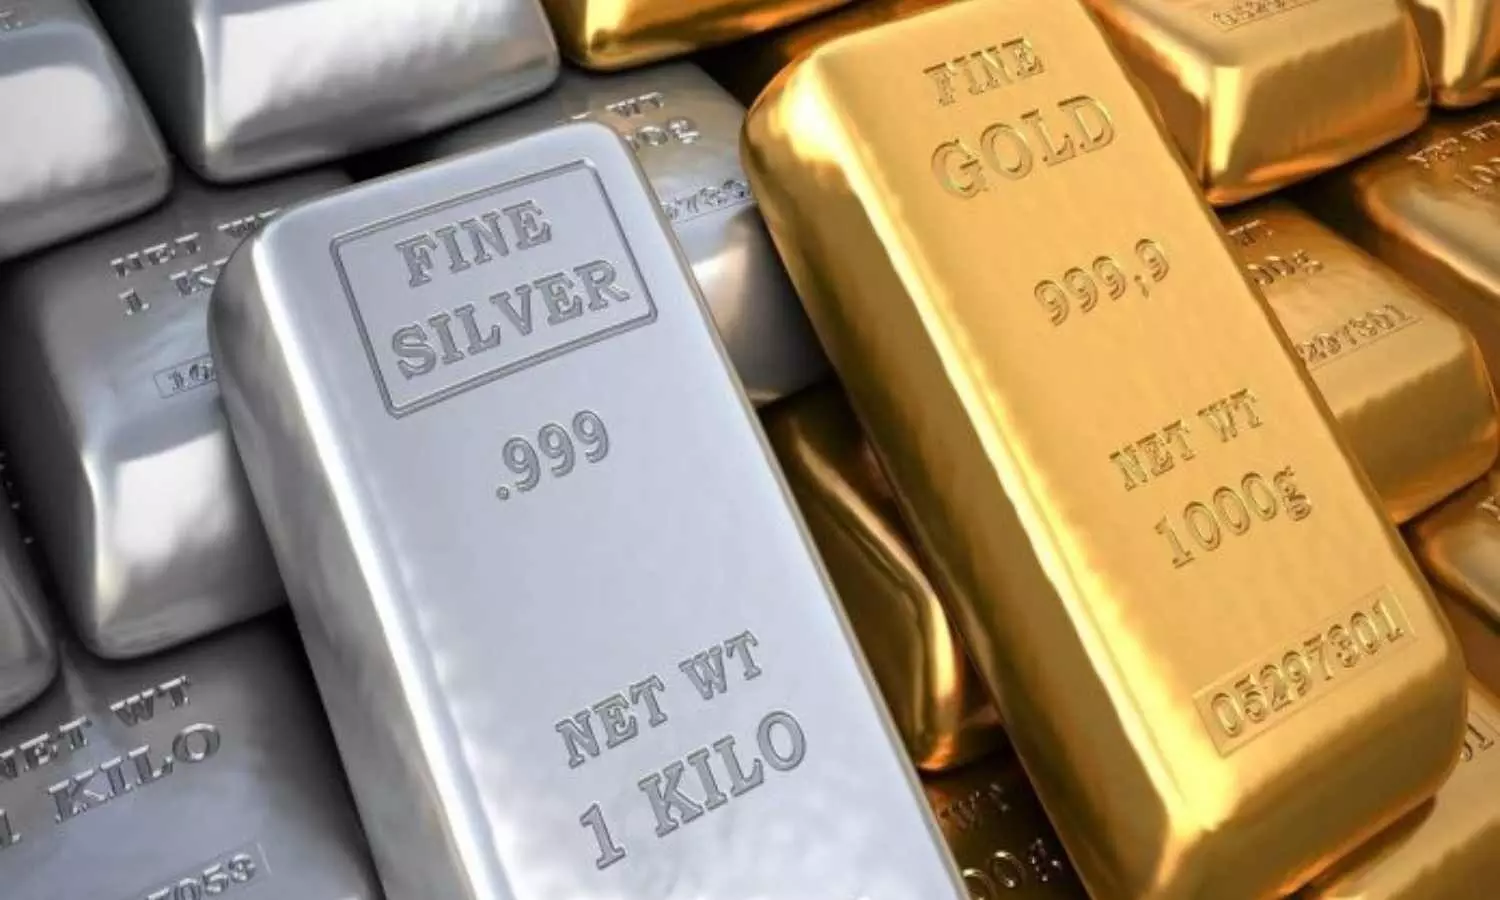 UP Gold Silver Price Today